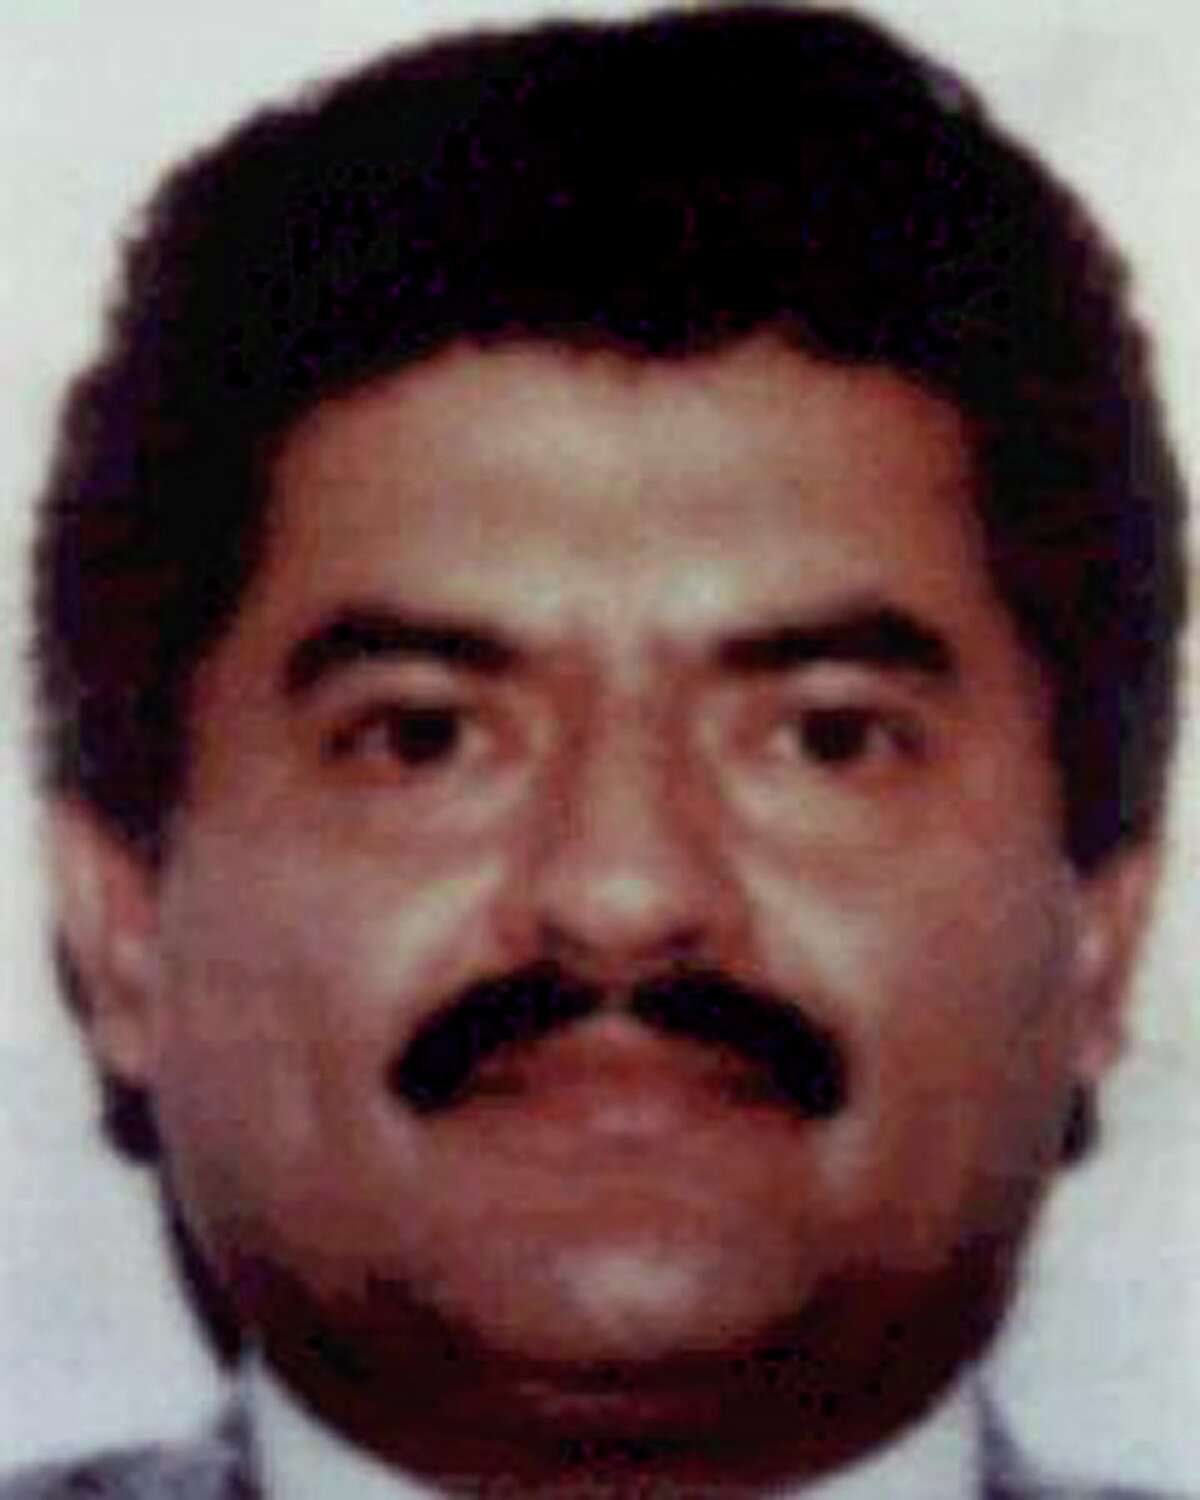 Juan José "El Azul" Esparragoza , a leader of the Sinaloa cartel, reportedly died of a heart attack in 2014. However, Mexican police have not yet been able to confirm his death, opening the possibility that he may still be involved with the cartel.